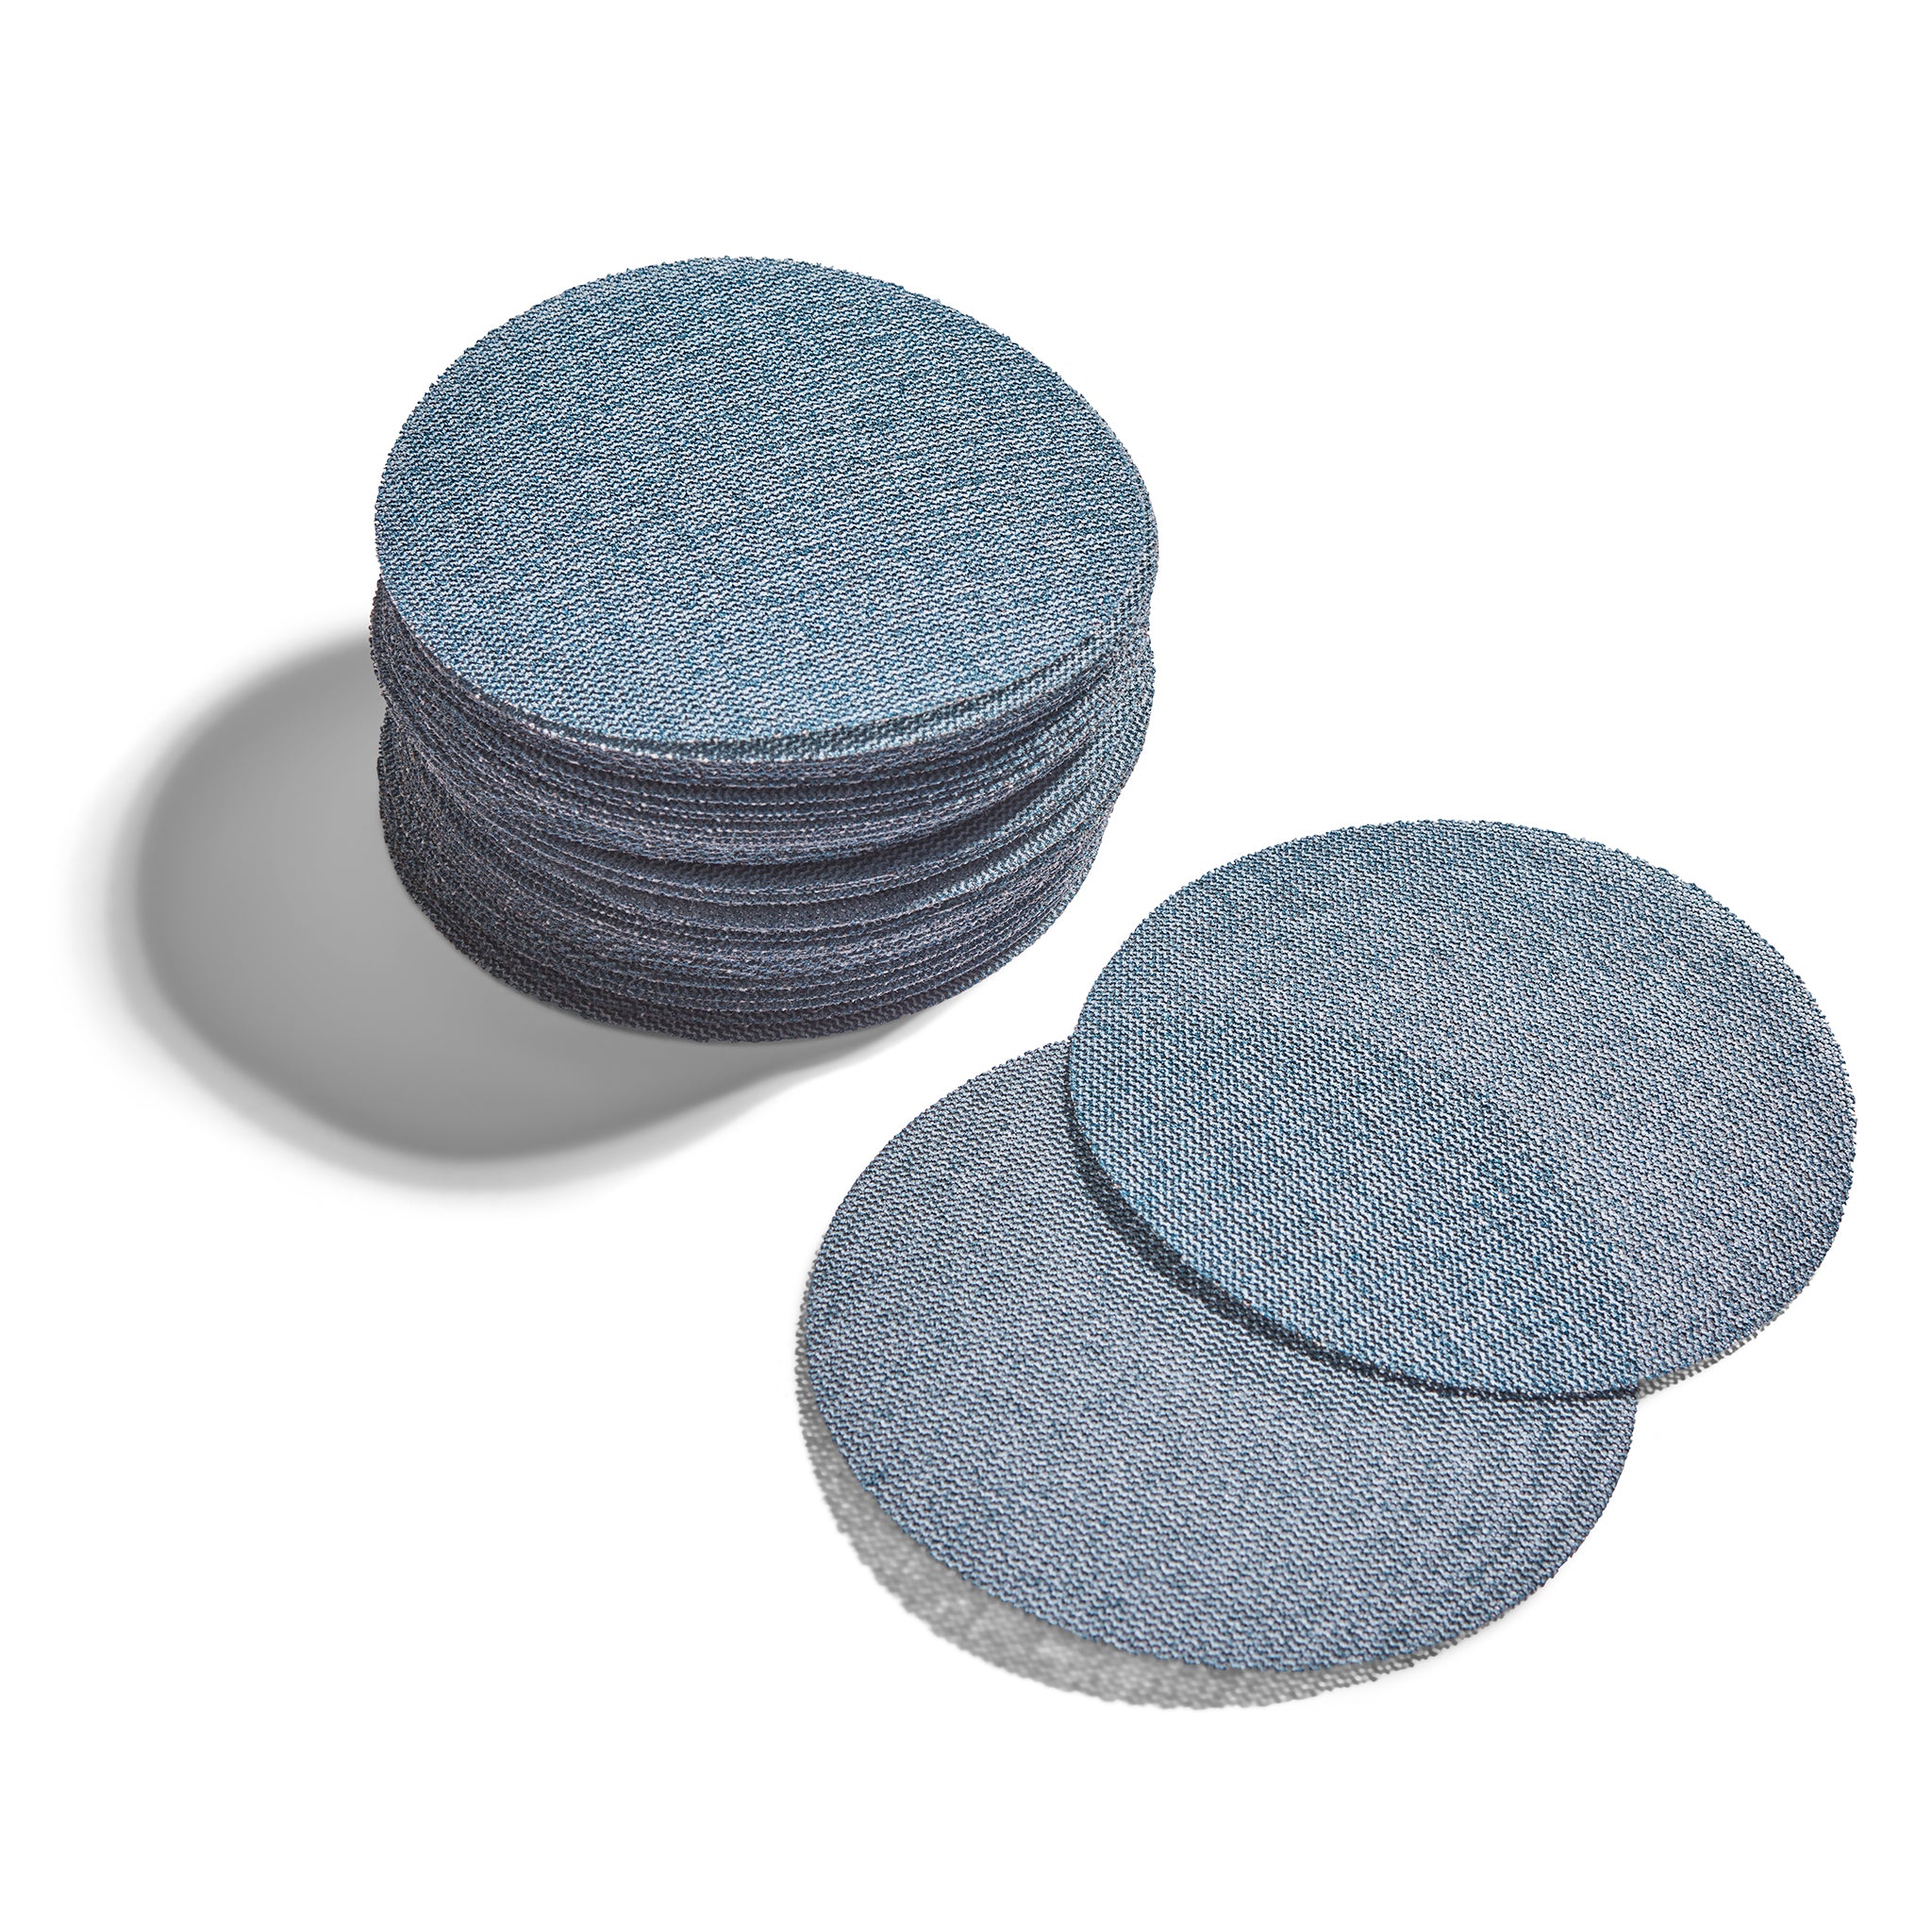 150mm Net Abrasive Discs - Mixed Pack of 50